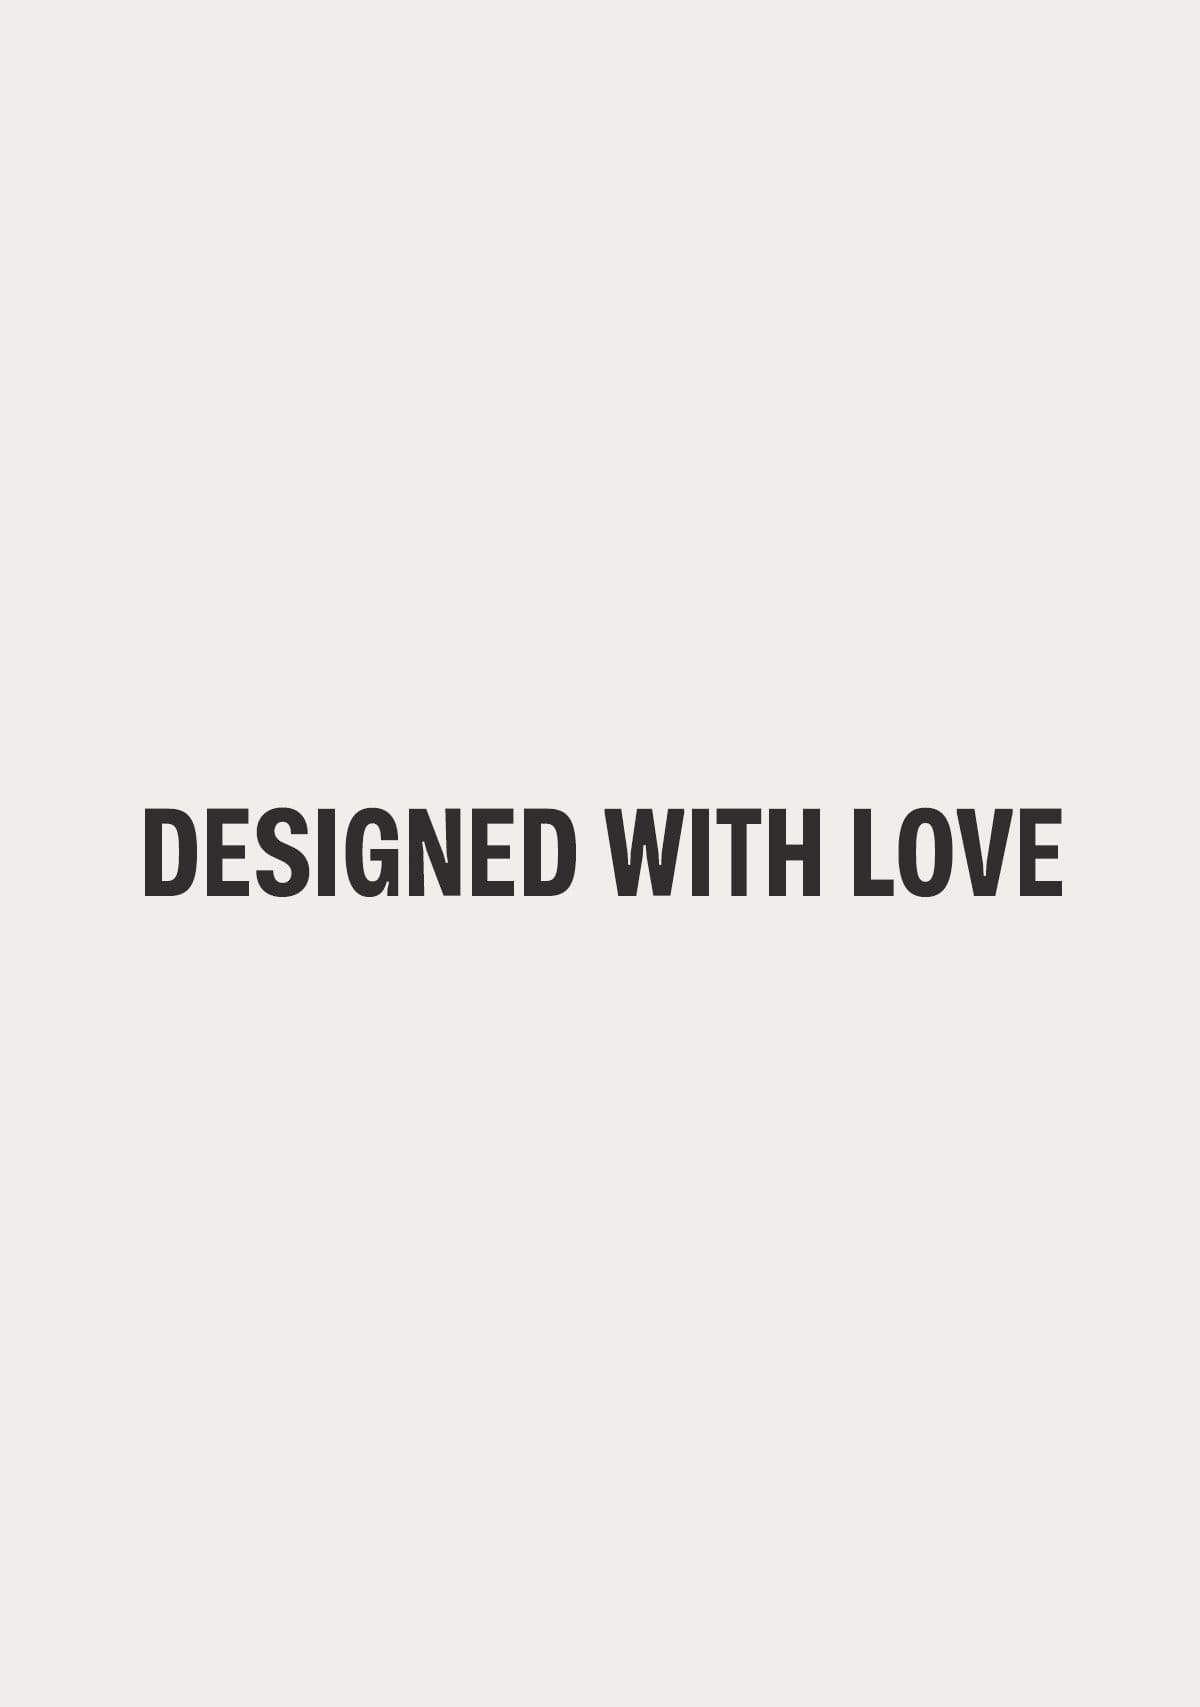 DESIGNED WITH LOVE